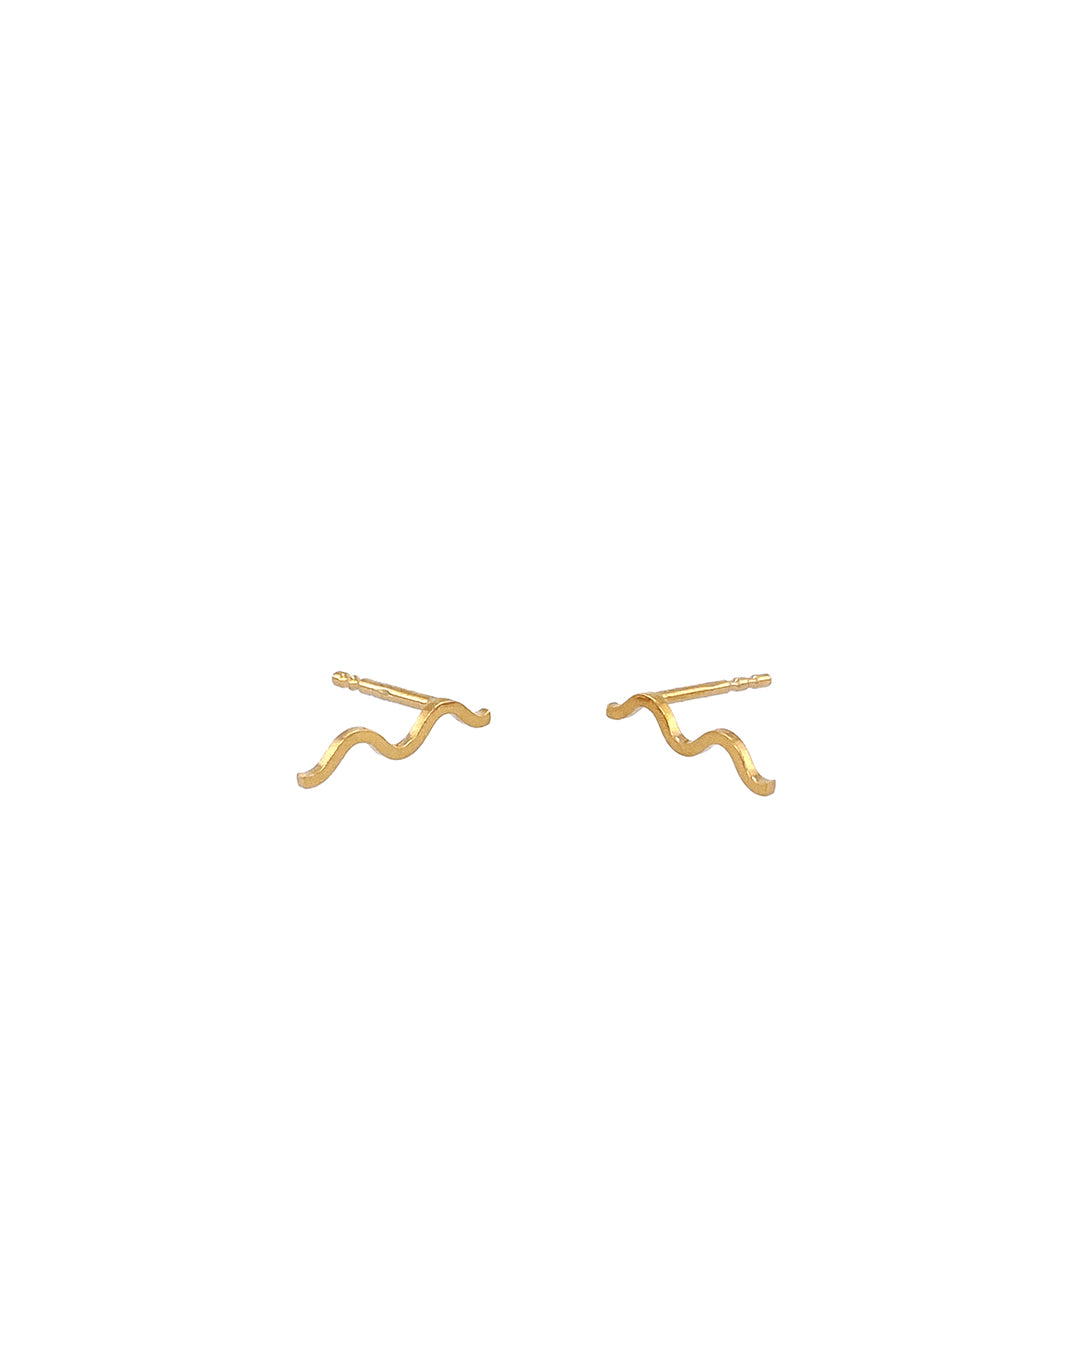 IDAMARI Unna Earrings in 18k Gold Plated Sterling Silver